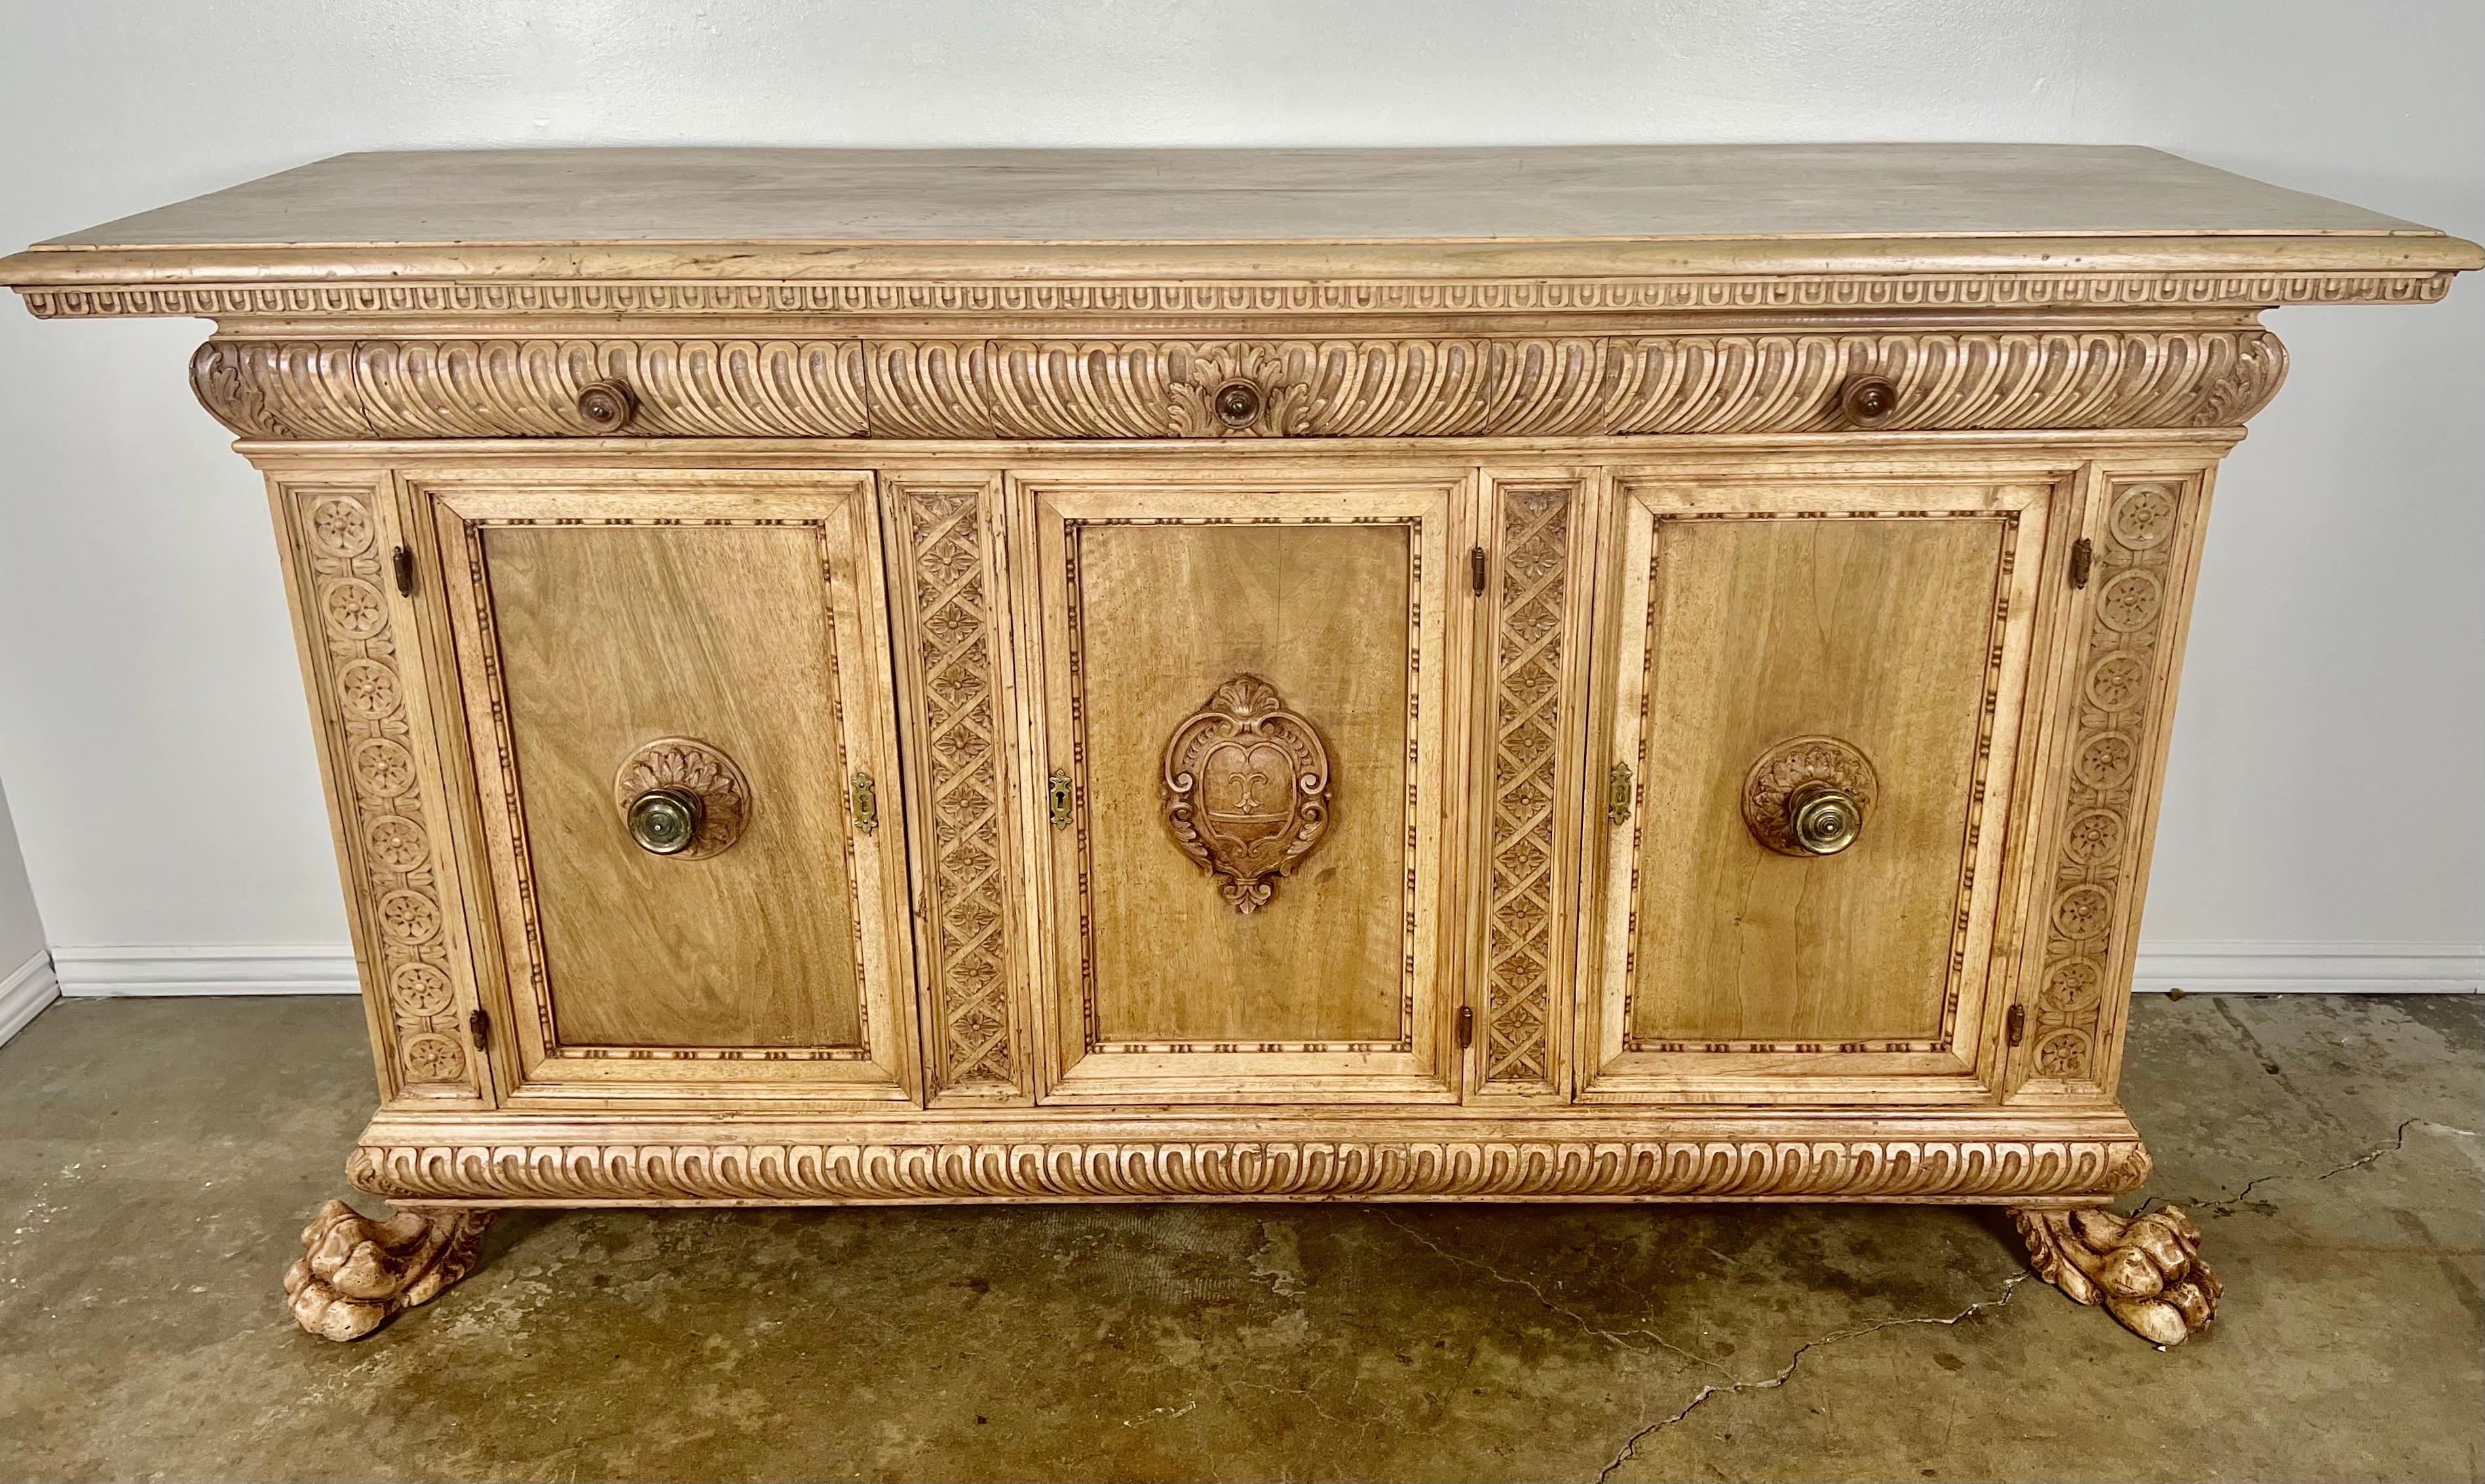 Early 19th century French Provincial carved credenza. The credenza has two working doors and three drawers for plenty of storage. The piece stands on two finely carved lion paw feet in the front. Notice the beautifully carved cartouche in the center